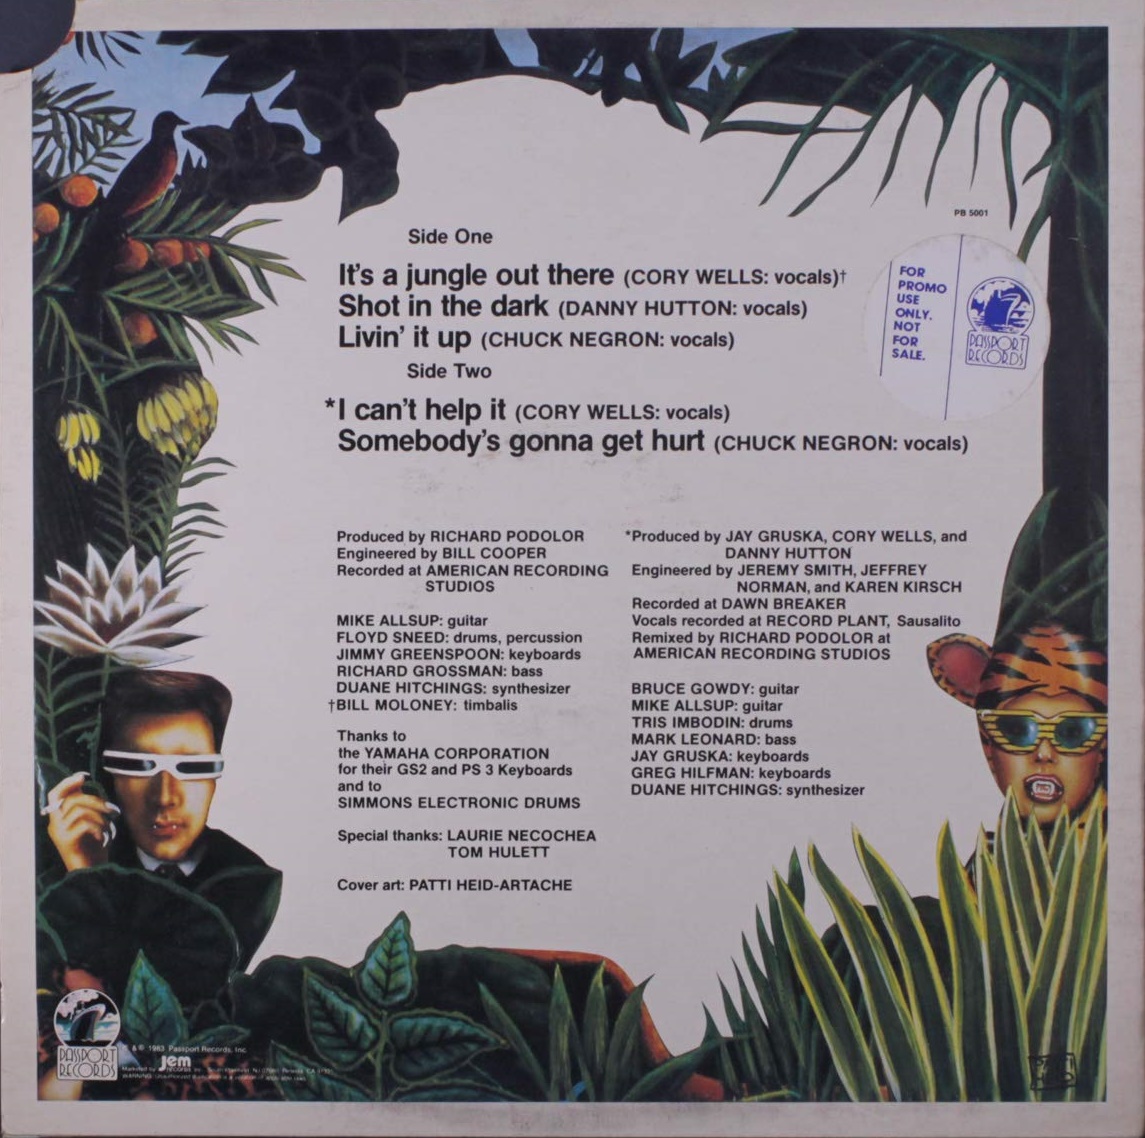 In the jungle текст. Jungle текст. It's a Jungle three Dog Night. King of the Jungle текст. Mastedon - 1989 - it's a Jungle out there.